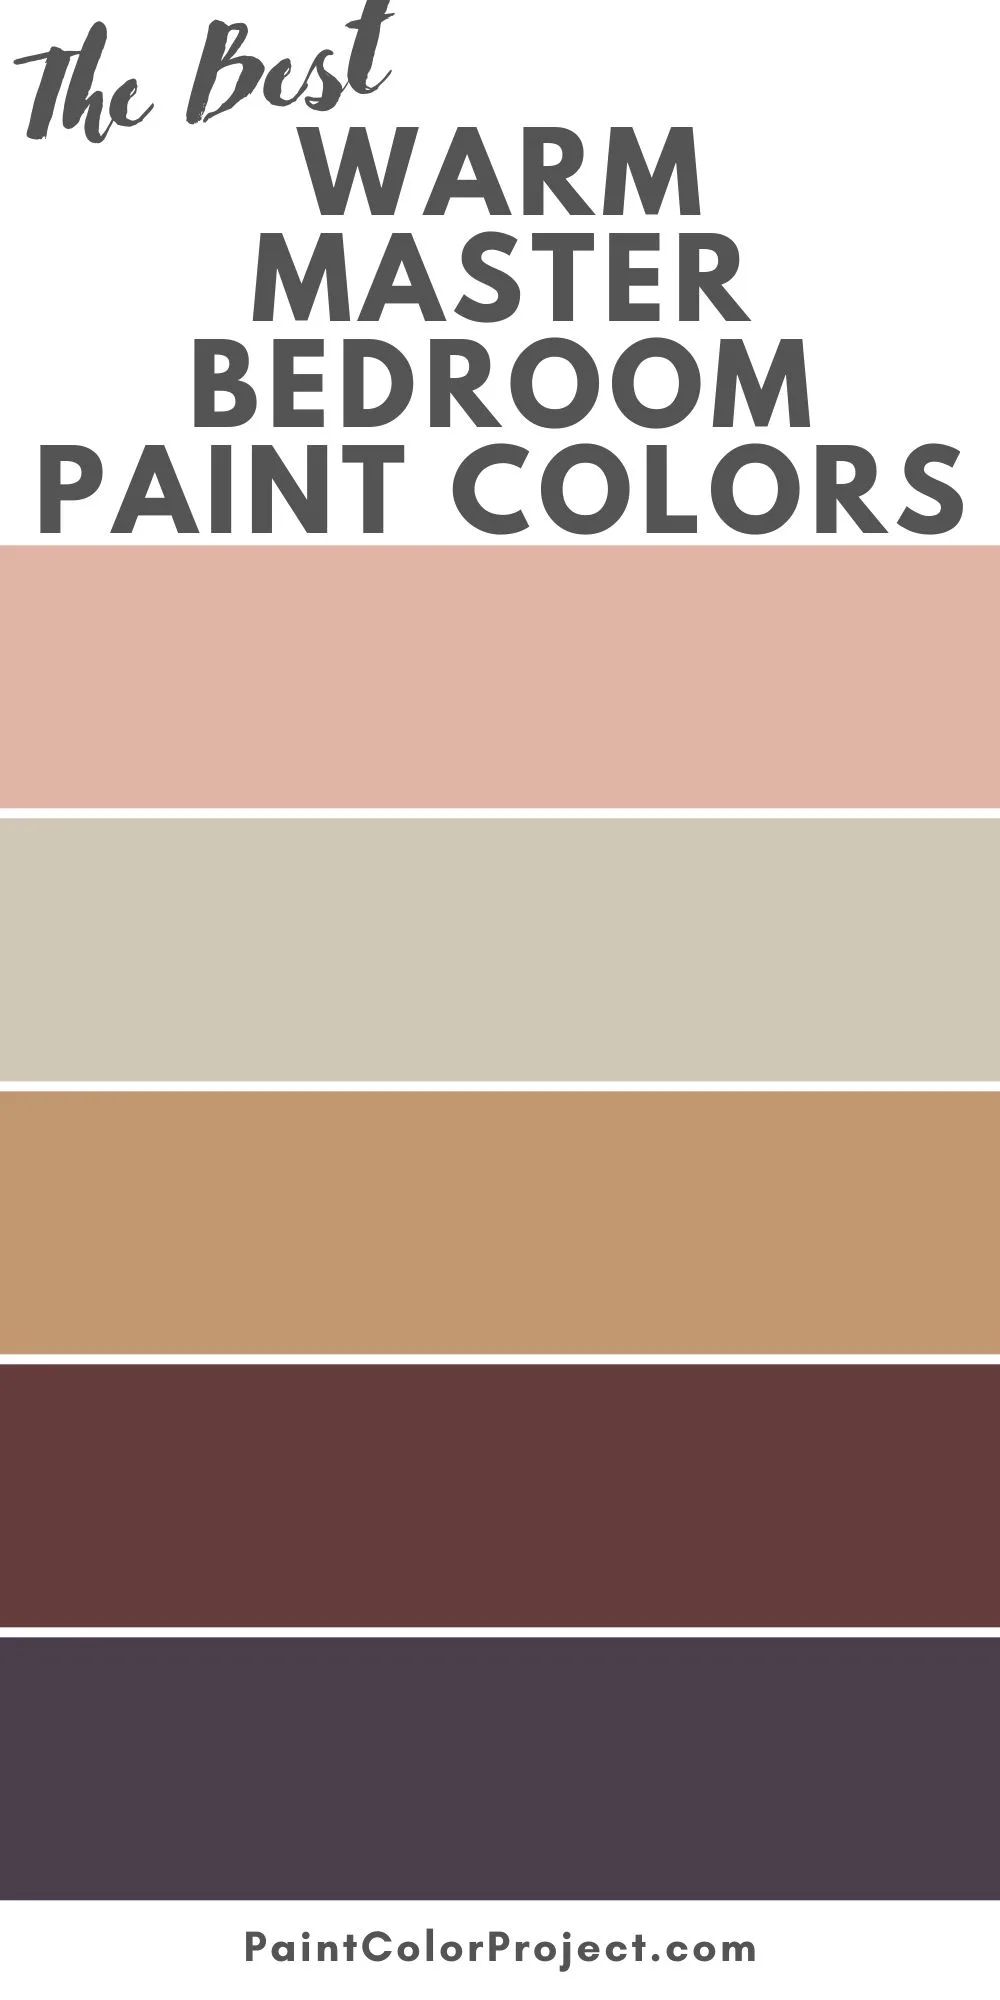 warm master bedroom paint colors.